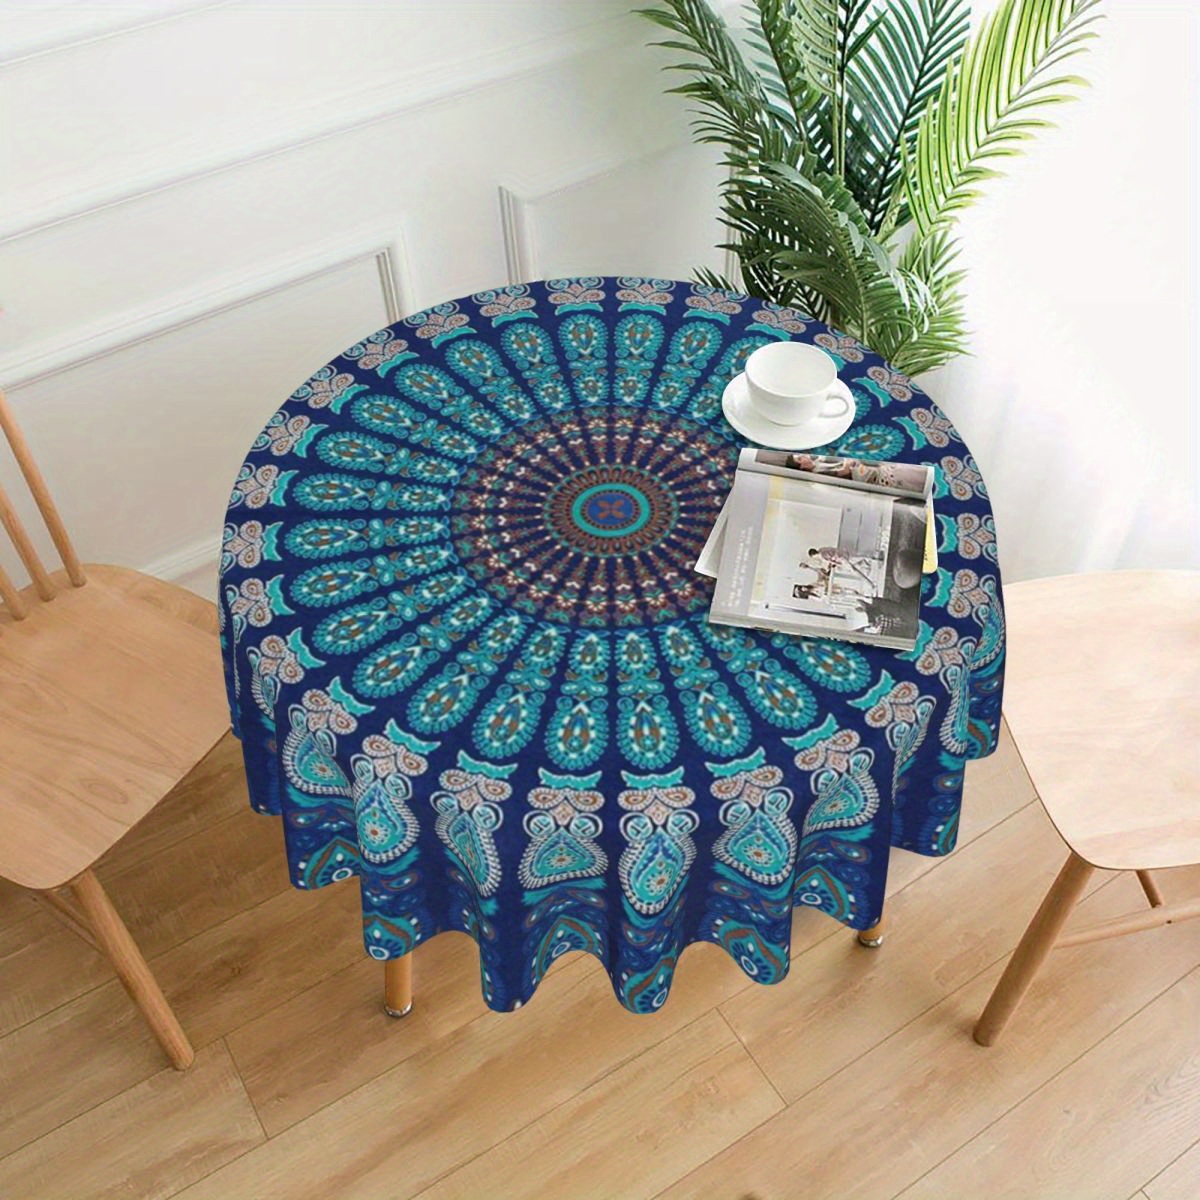 

1pc Vintage Mandala Pattern Round Tablecloth, Machine Made Woven Polyester, Stain Resistant Washable Fine Fiber Table Cover, Festive Party Decor For Home Kitchen Dining Room, Holiday Gift